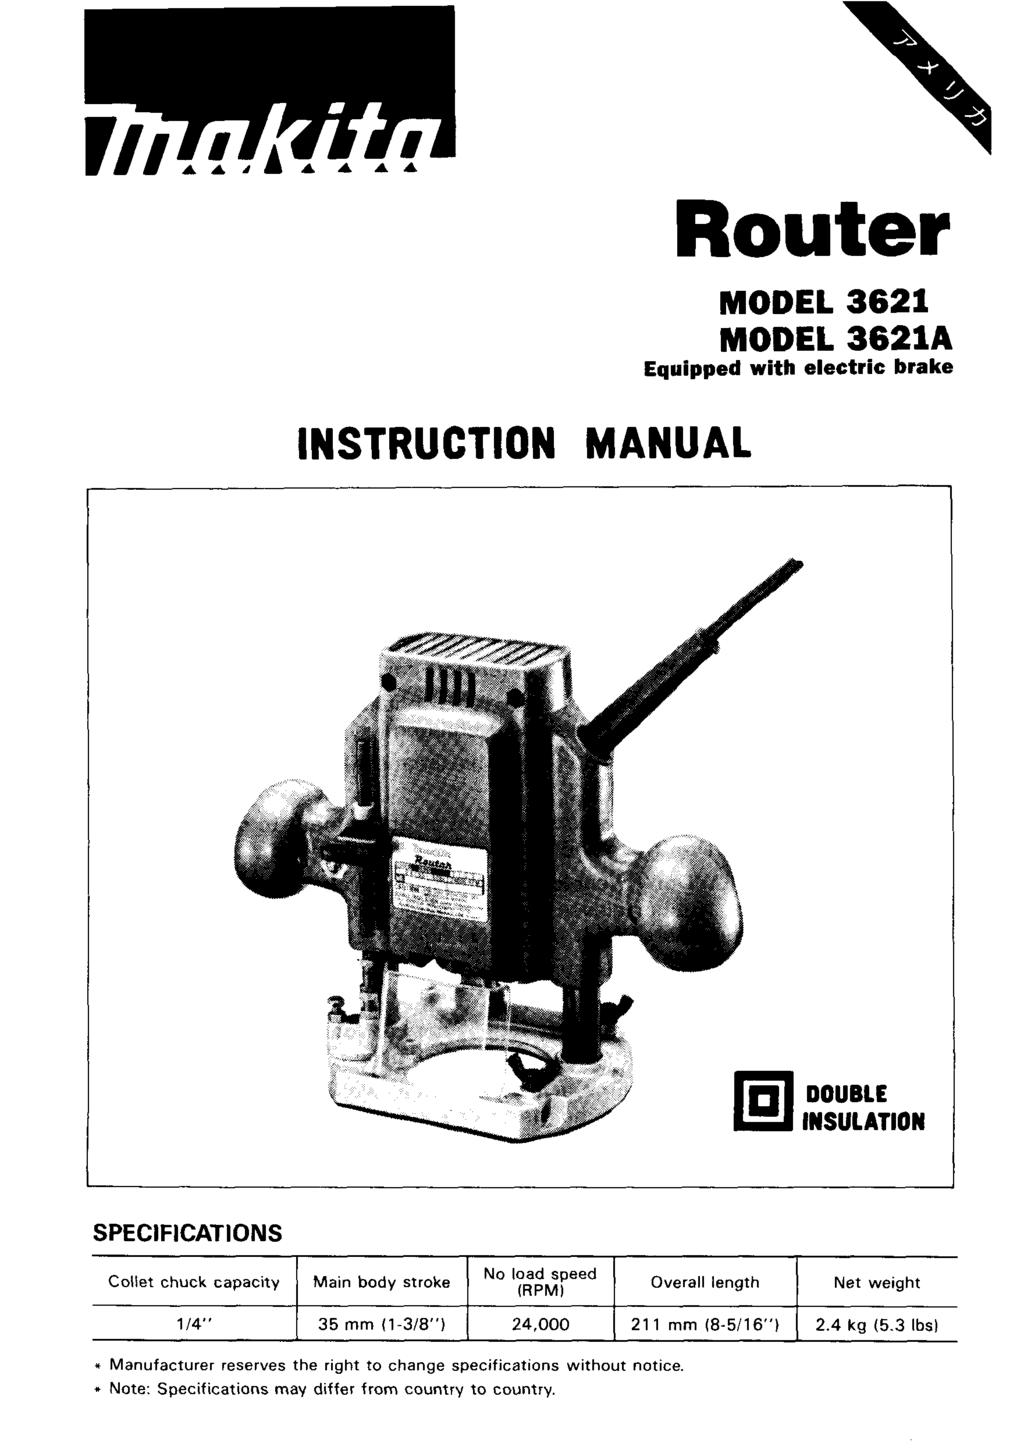 Router MODEL 362 MODEL 362A Equipped with electric brake I INSTRUCTION MANUAL DOUBLE INSULATION I SPECIFICATIONS Collet chuck capacity 4" Main body stroke No load speed Overall length Net